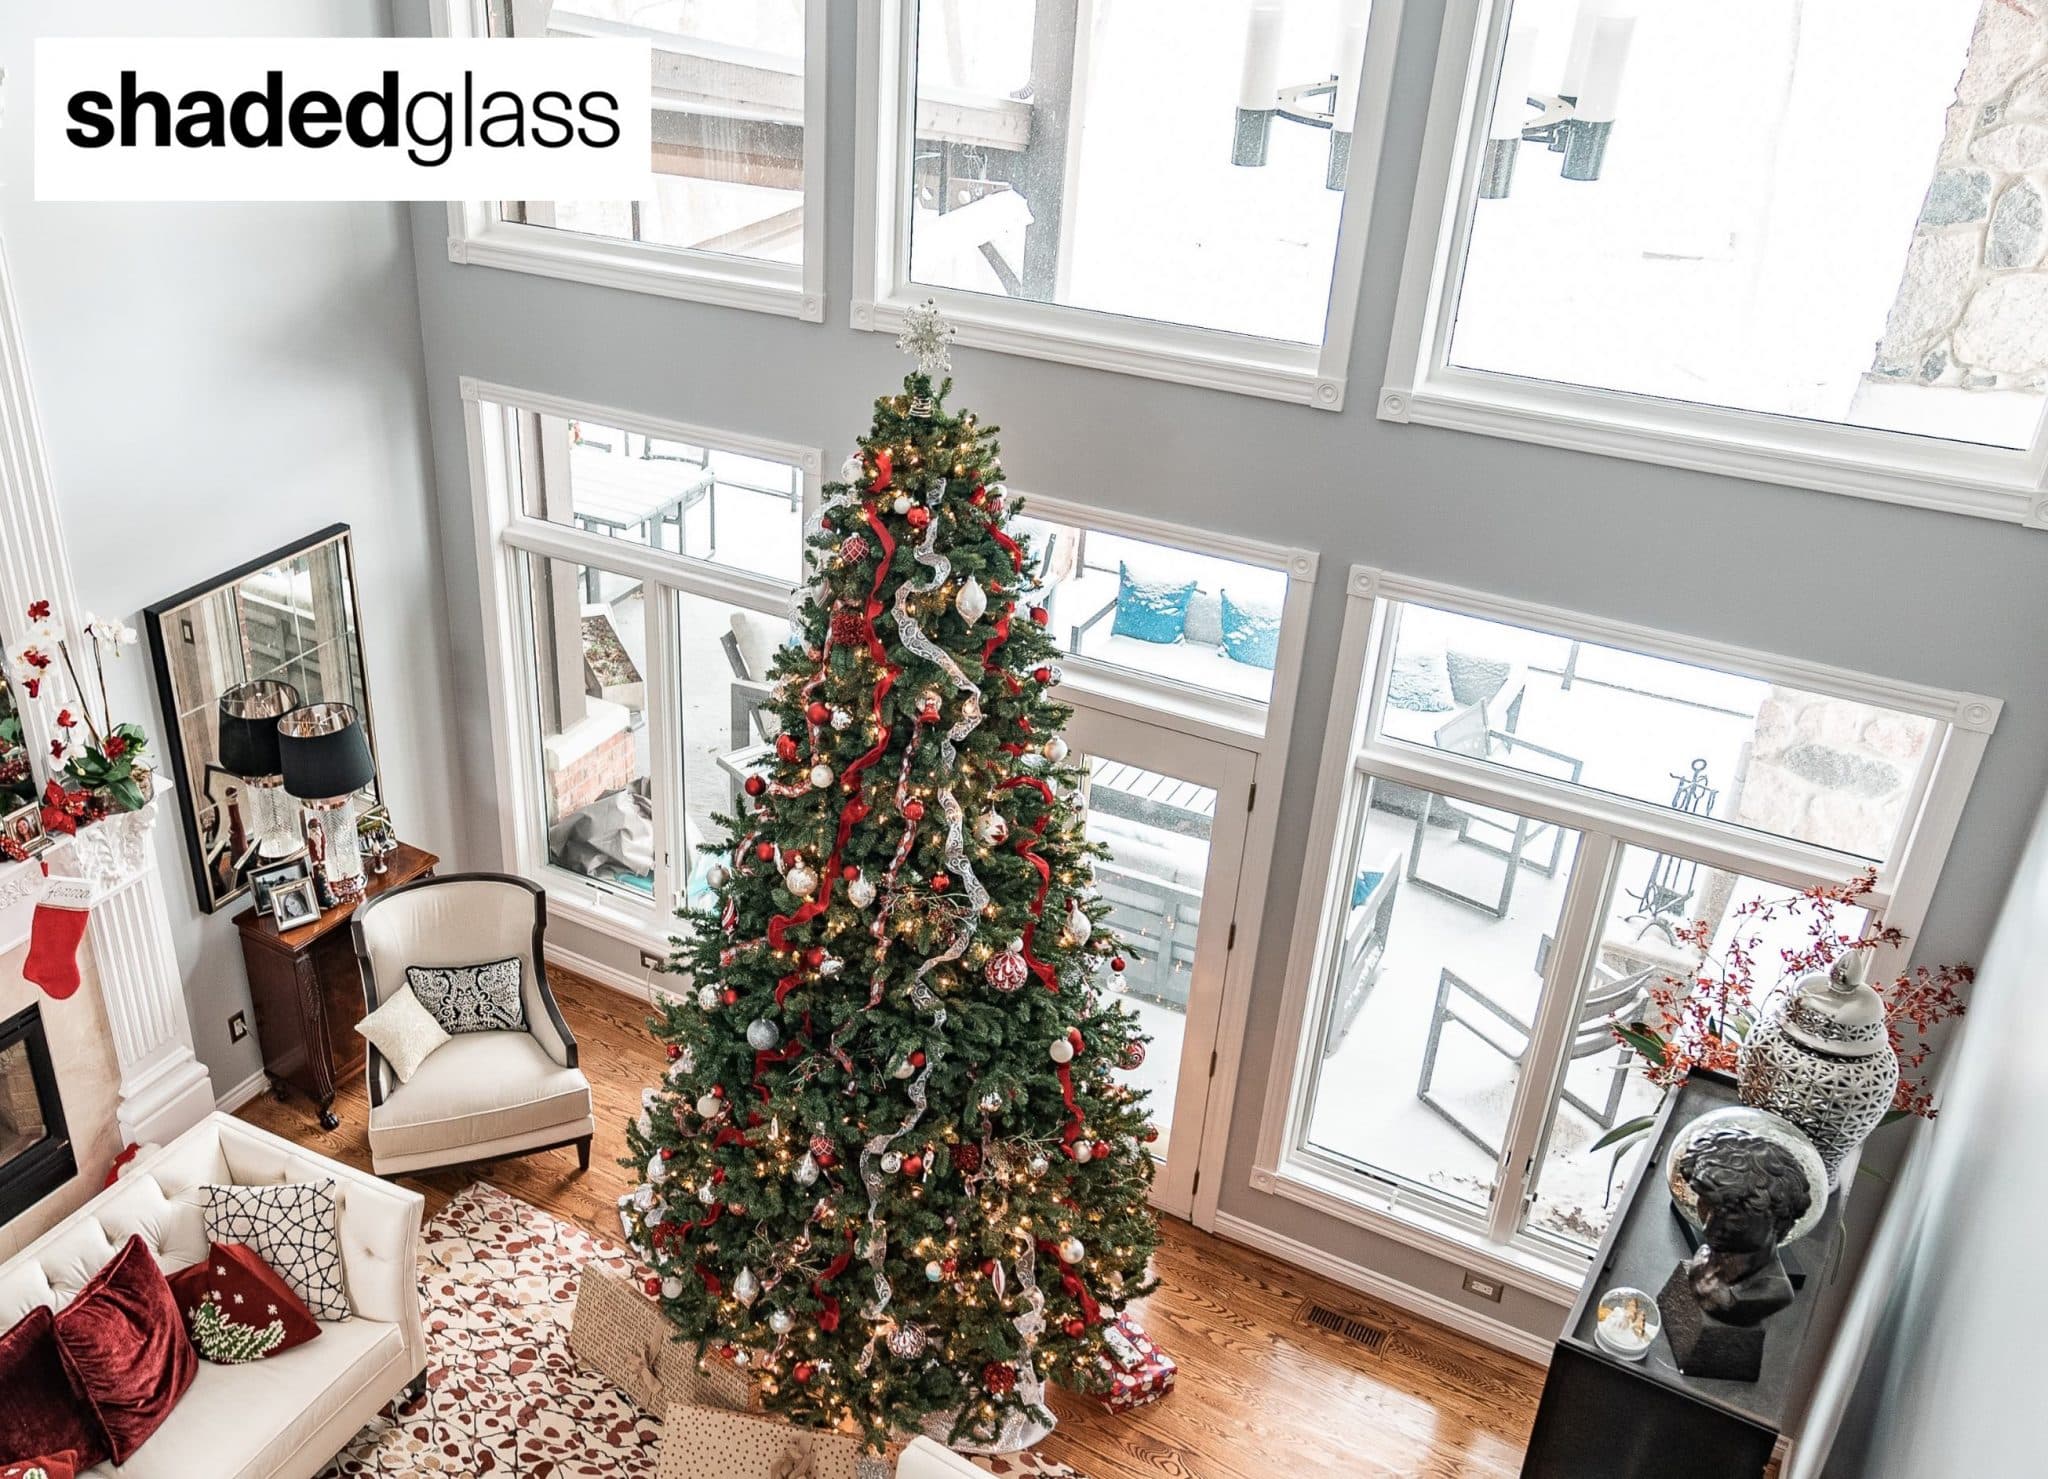 Perfect Home Gift? – 3 Reasons to Consider Window Film